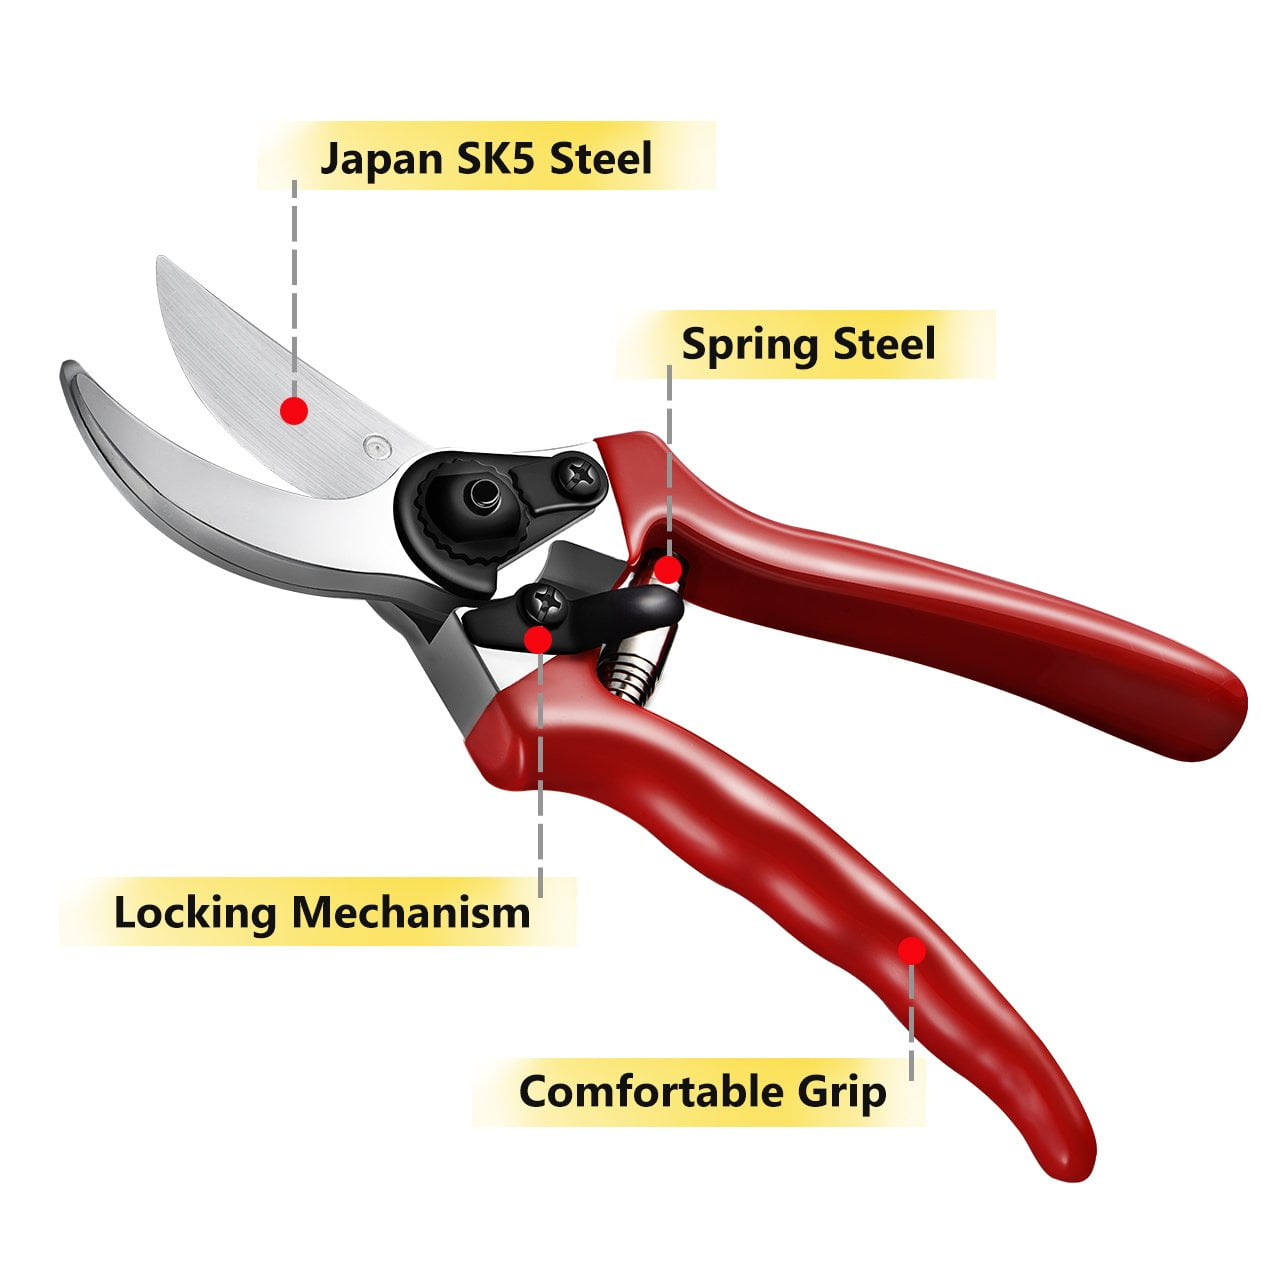 Professional Shape Bypass Pruner Scissor Tree Trimmers Secateurs Clipper Fruits Leaf Snip Trimming Tool for Garden Nuovoware Gardening Hand Pruner Pruning Shear 8 inch with HCS Blade 